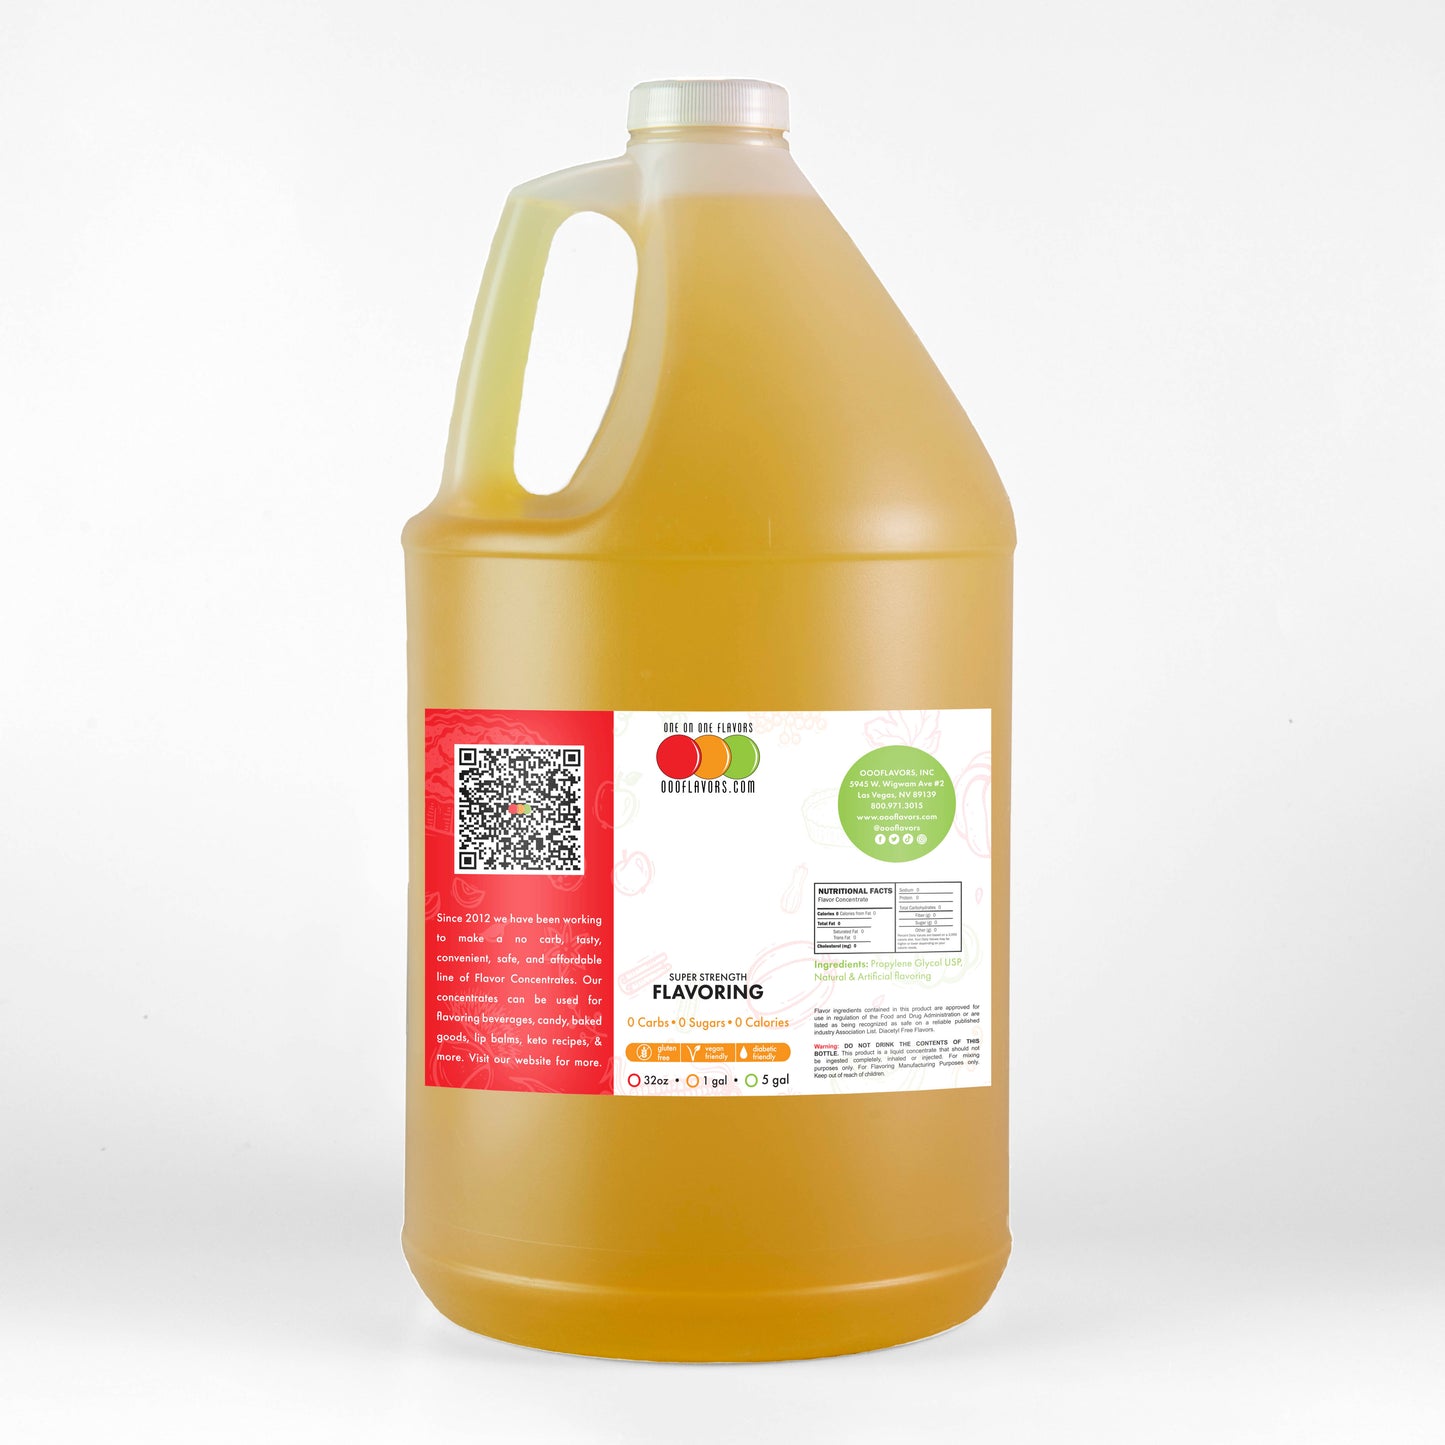 Apple (Gala) Flavored Liquid Concentrate - Natural